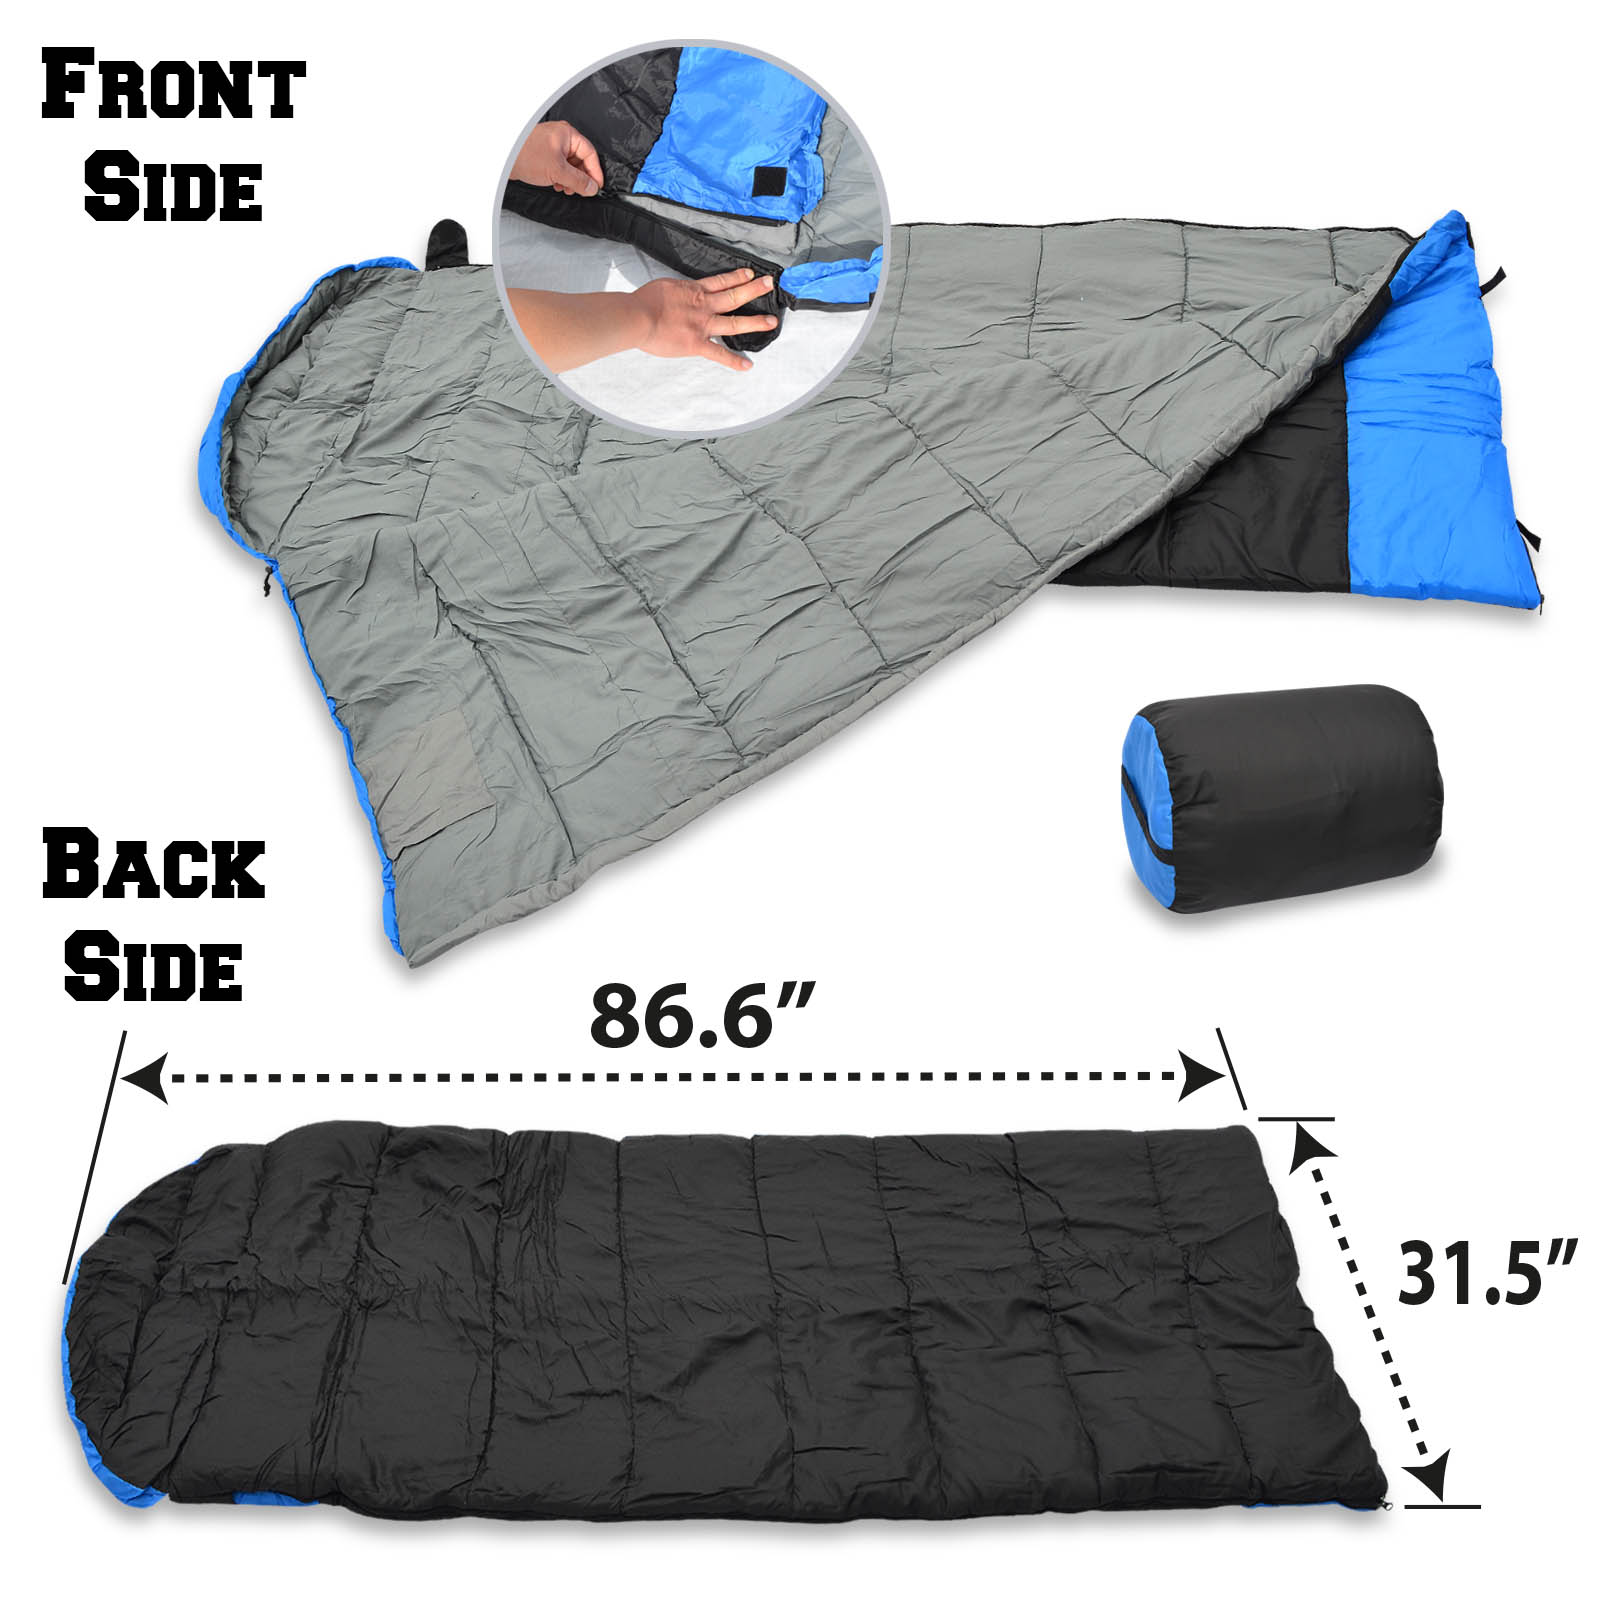 Sunrise Hooded Sleeping Bag Outdoor Camping or Indoor Sleep with Carry Bag(Blue) - image 2 of 9